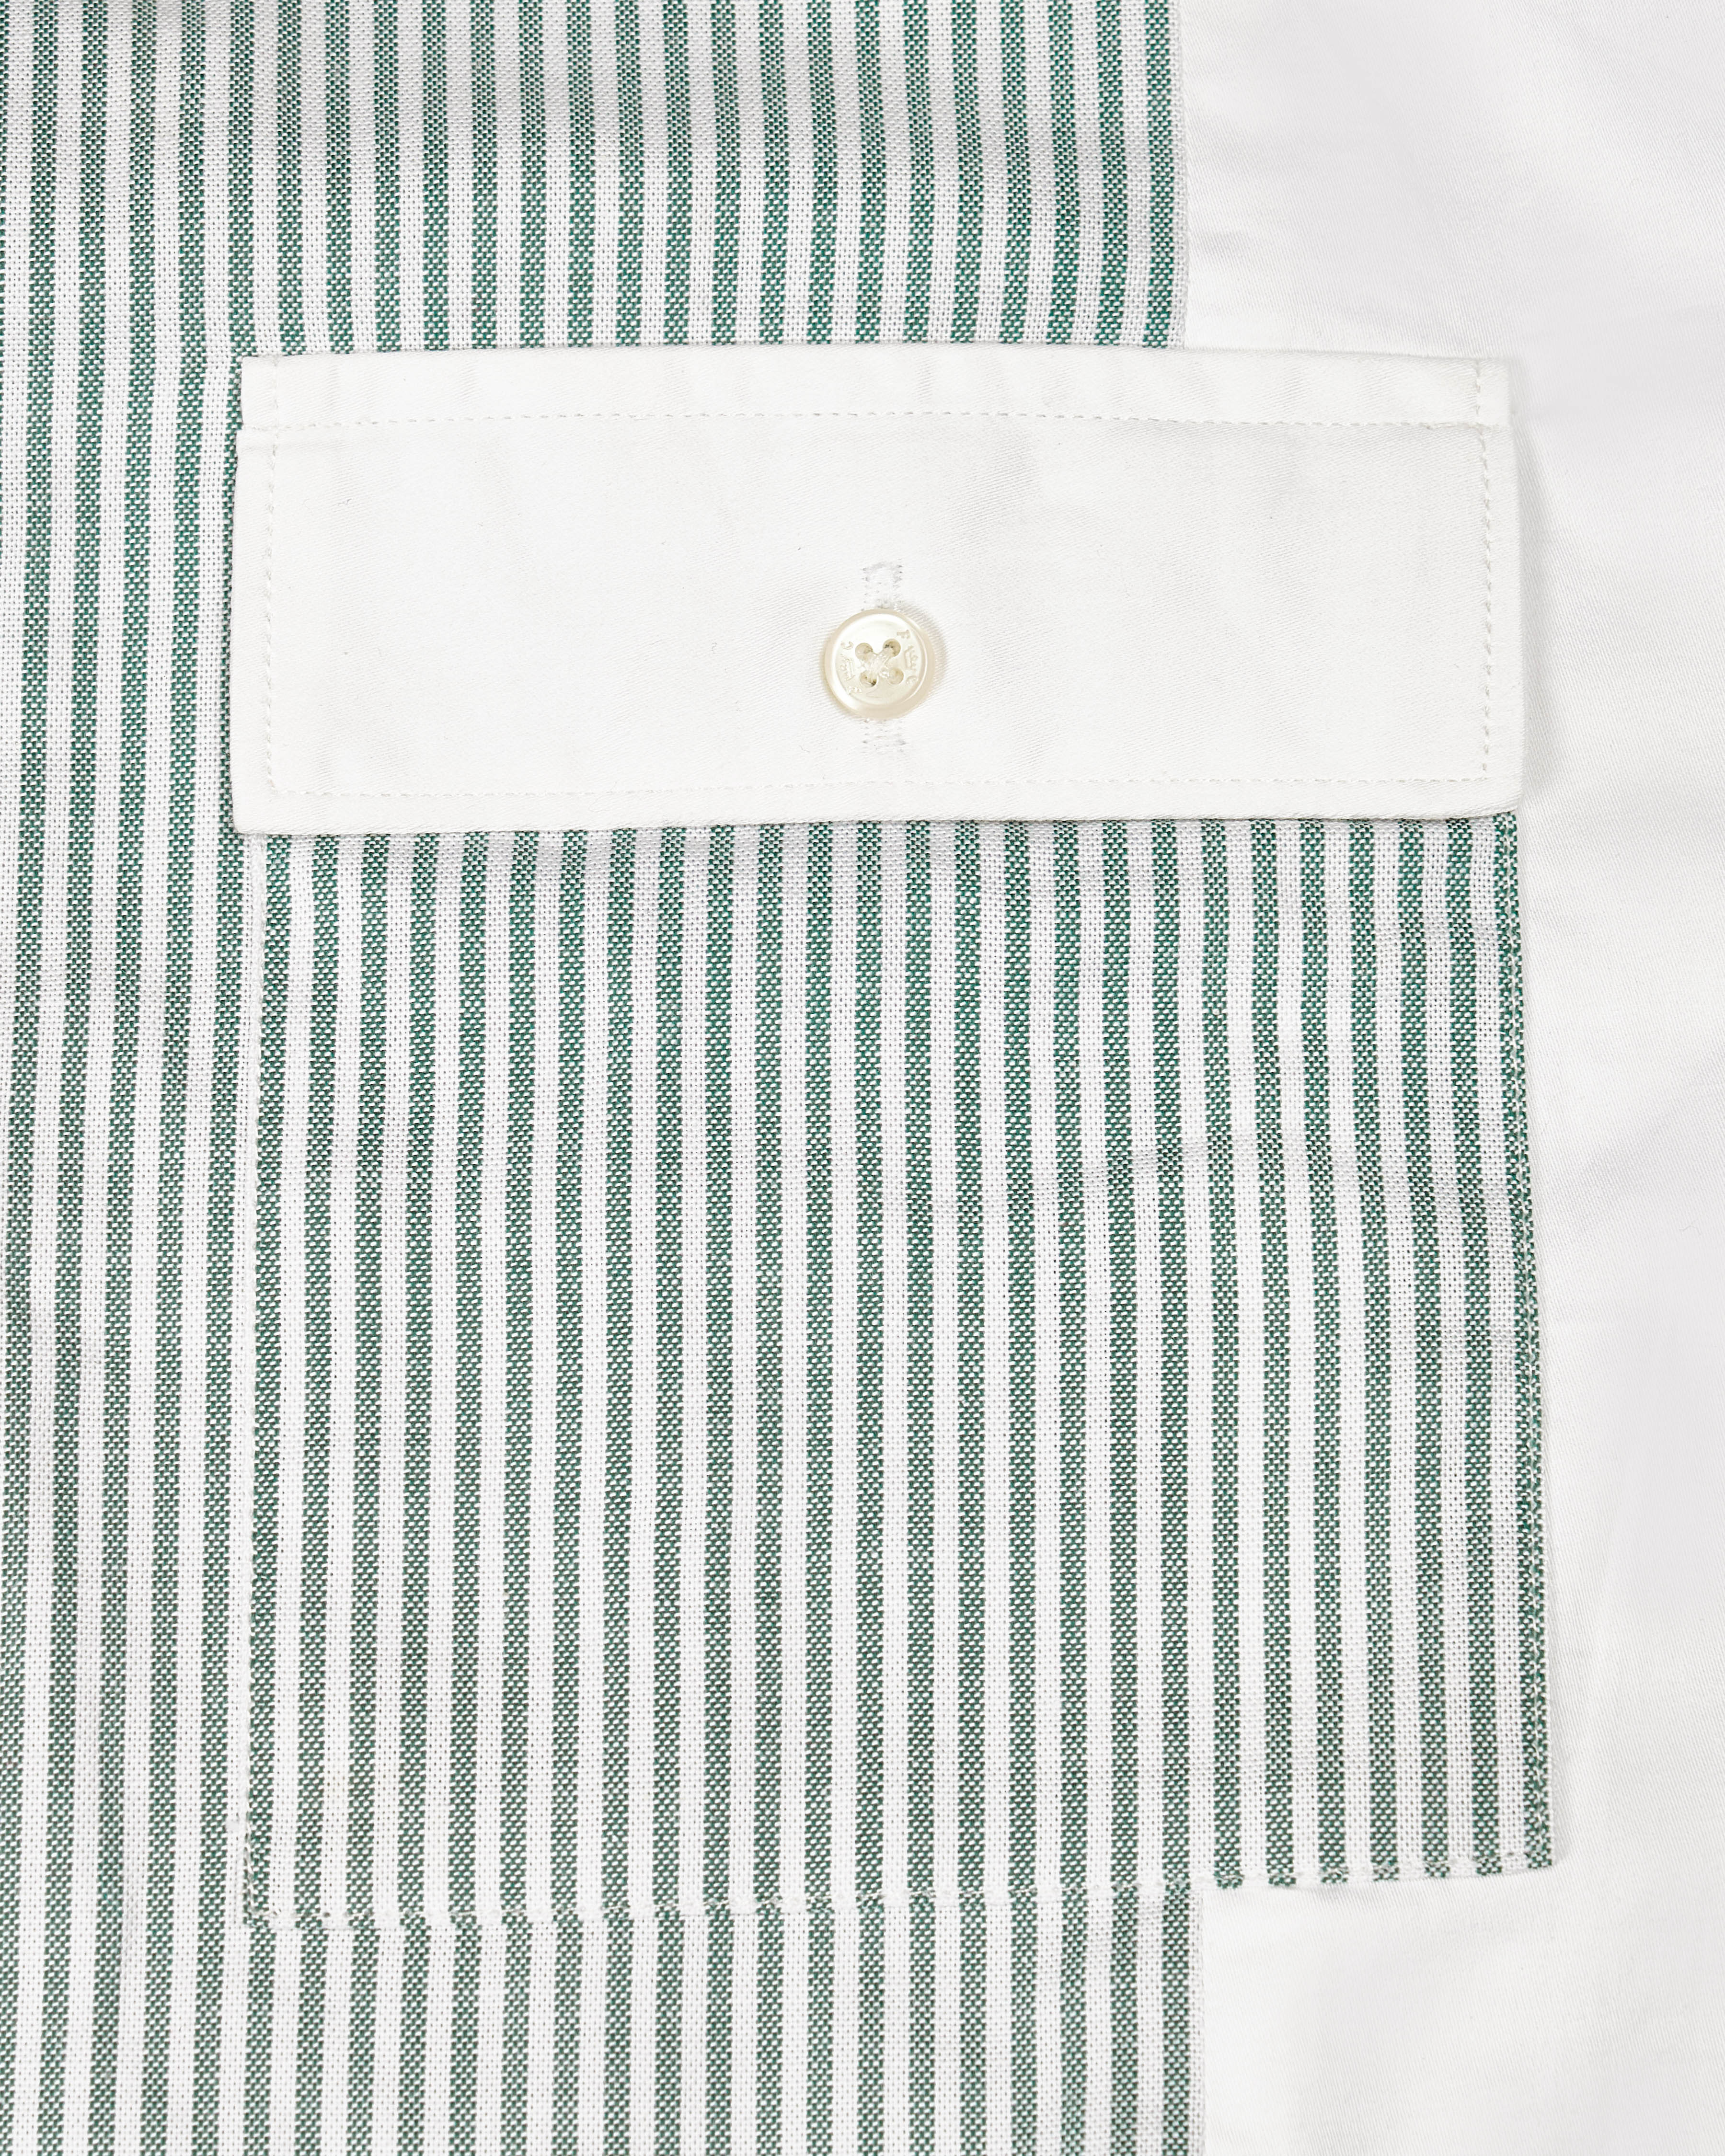 Bright White with Cascade Green Striped Royal Oxford Designer Shirt